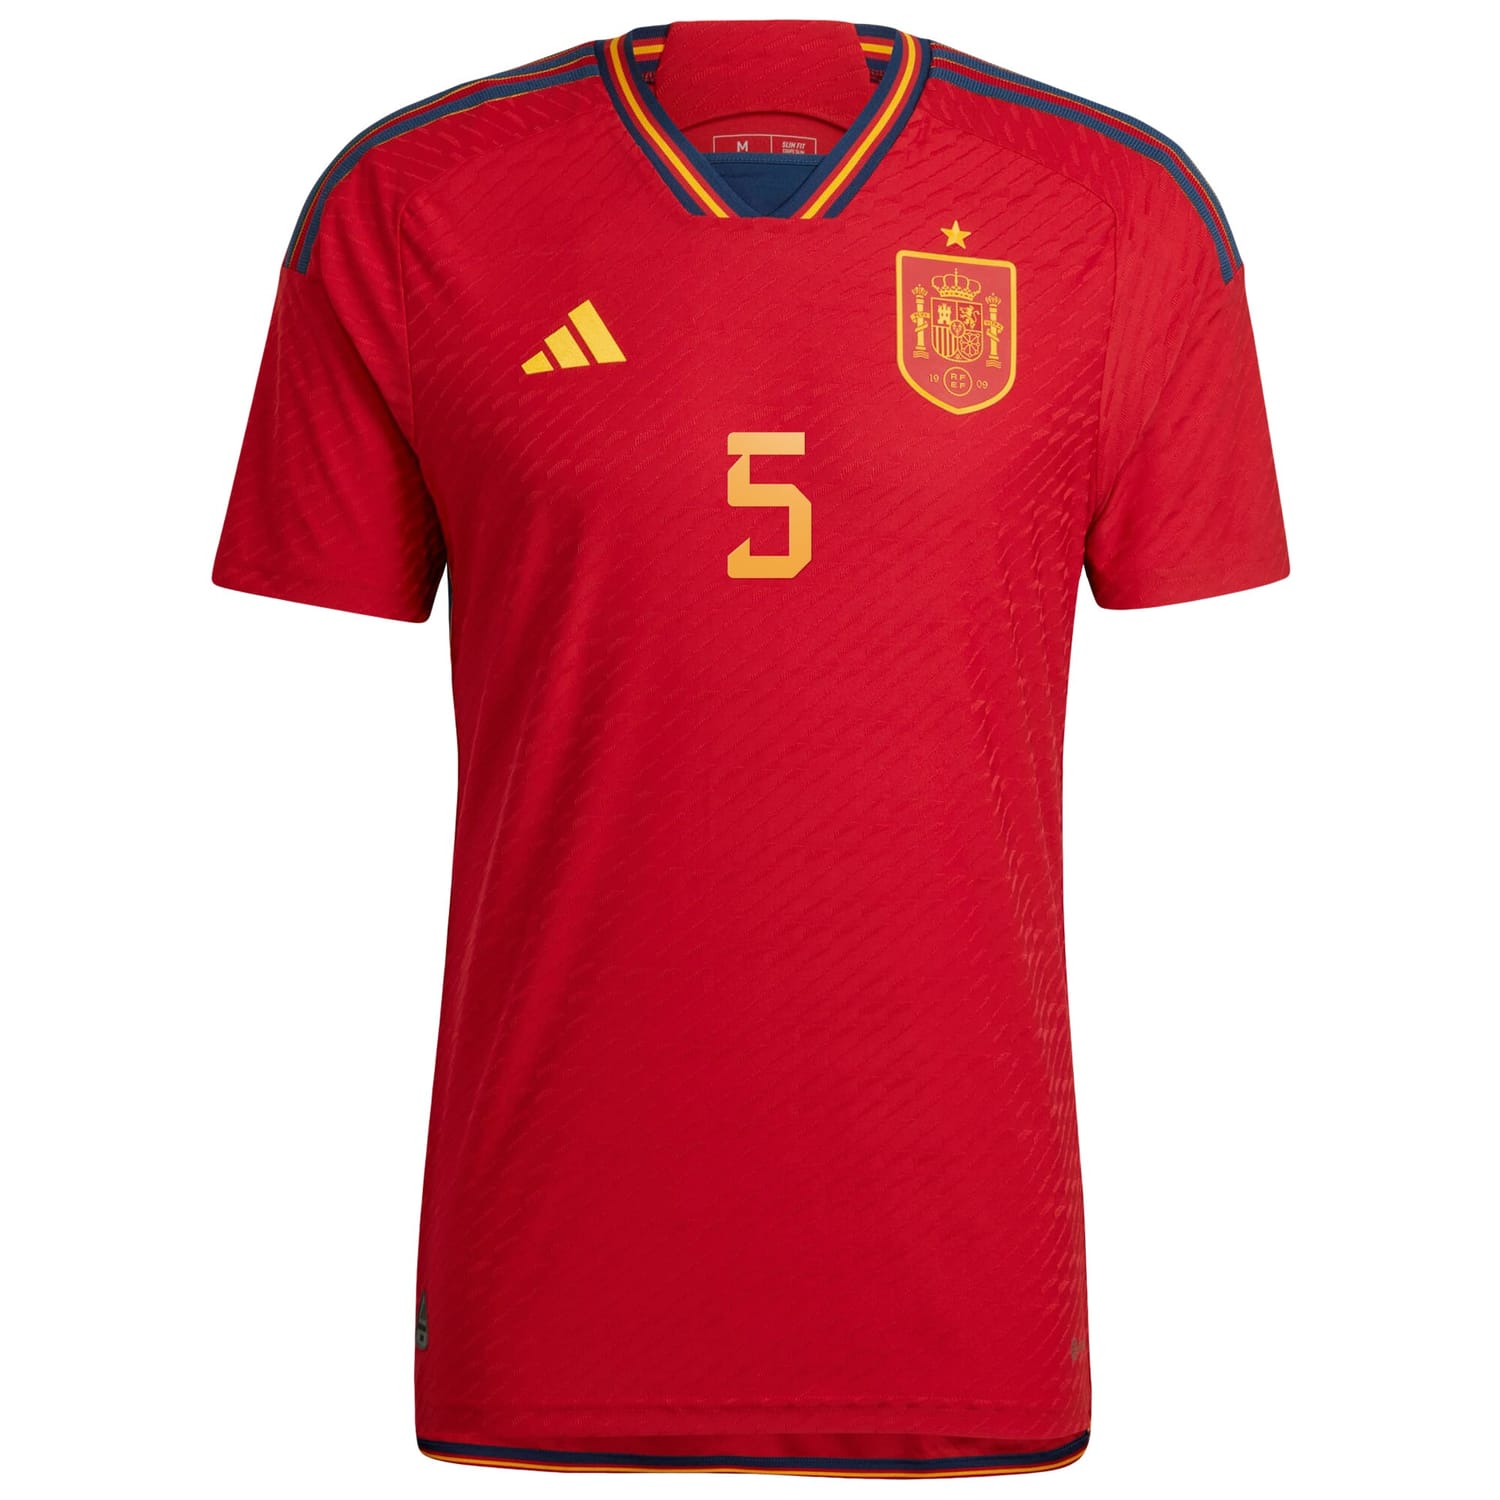 Spain National Team Home Authentic Jersey Shirt Red 2022-23 player Sergio Busquets printing for Men